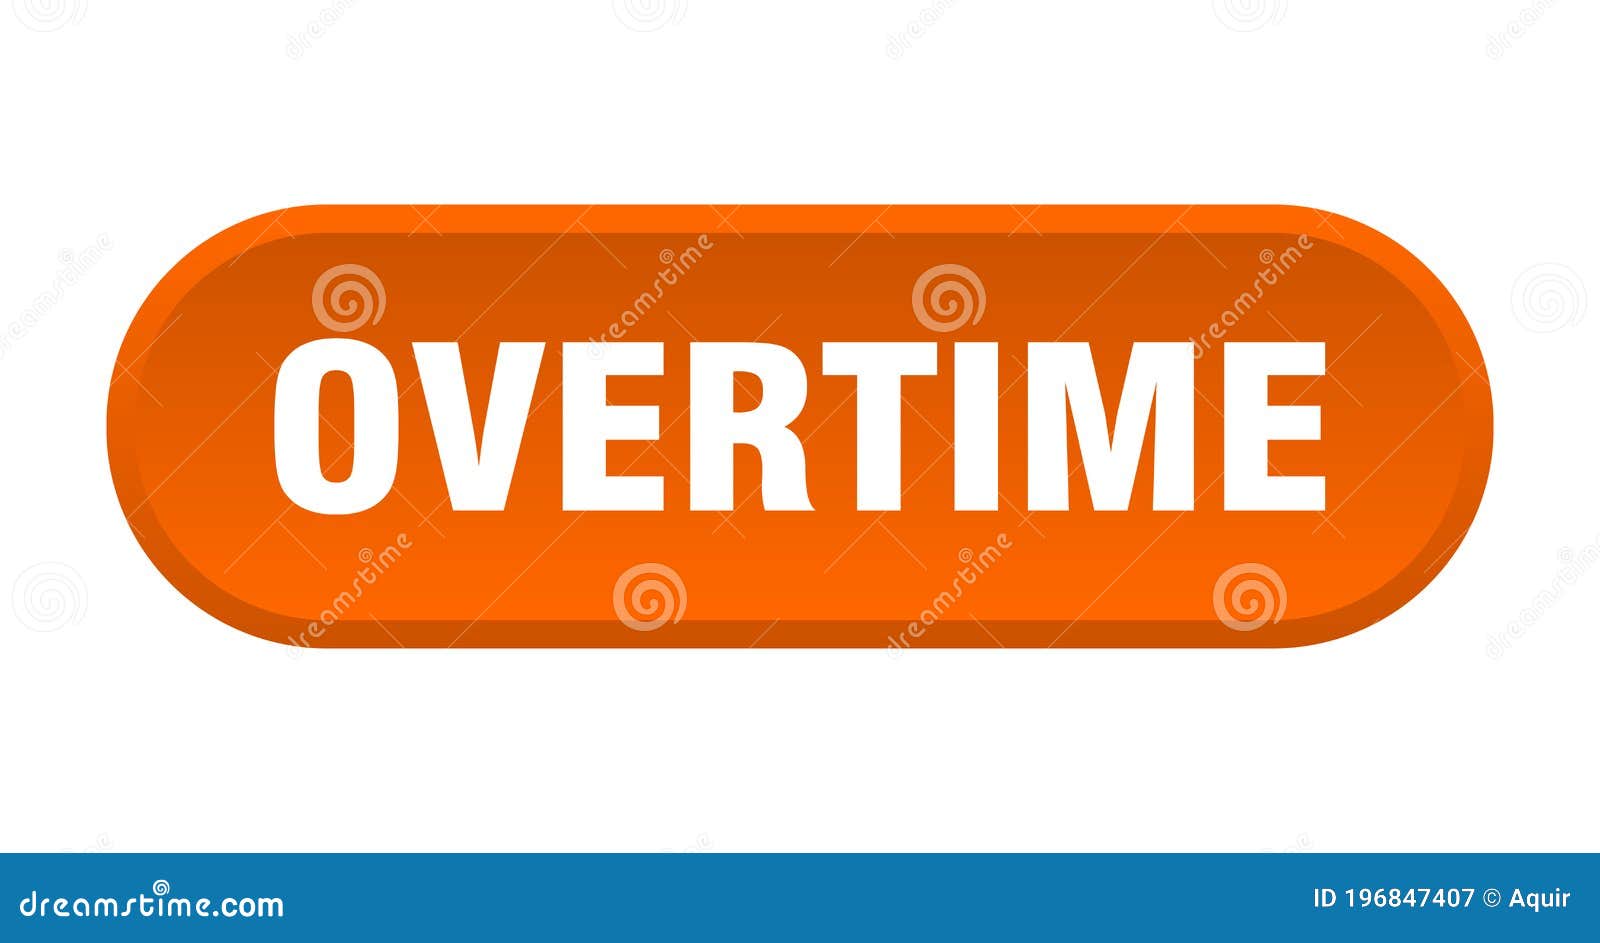 overtime button. rounded sign on white background